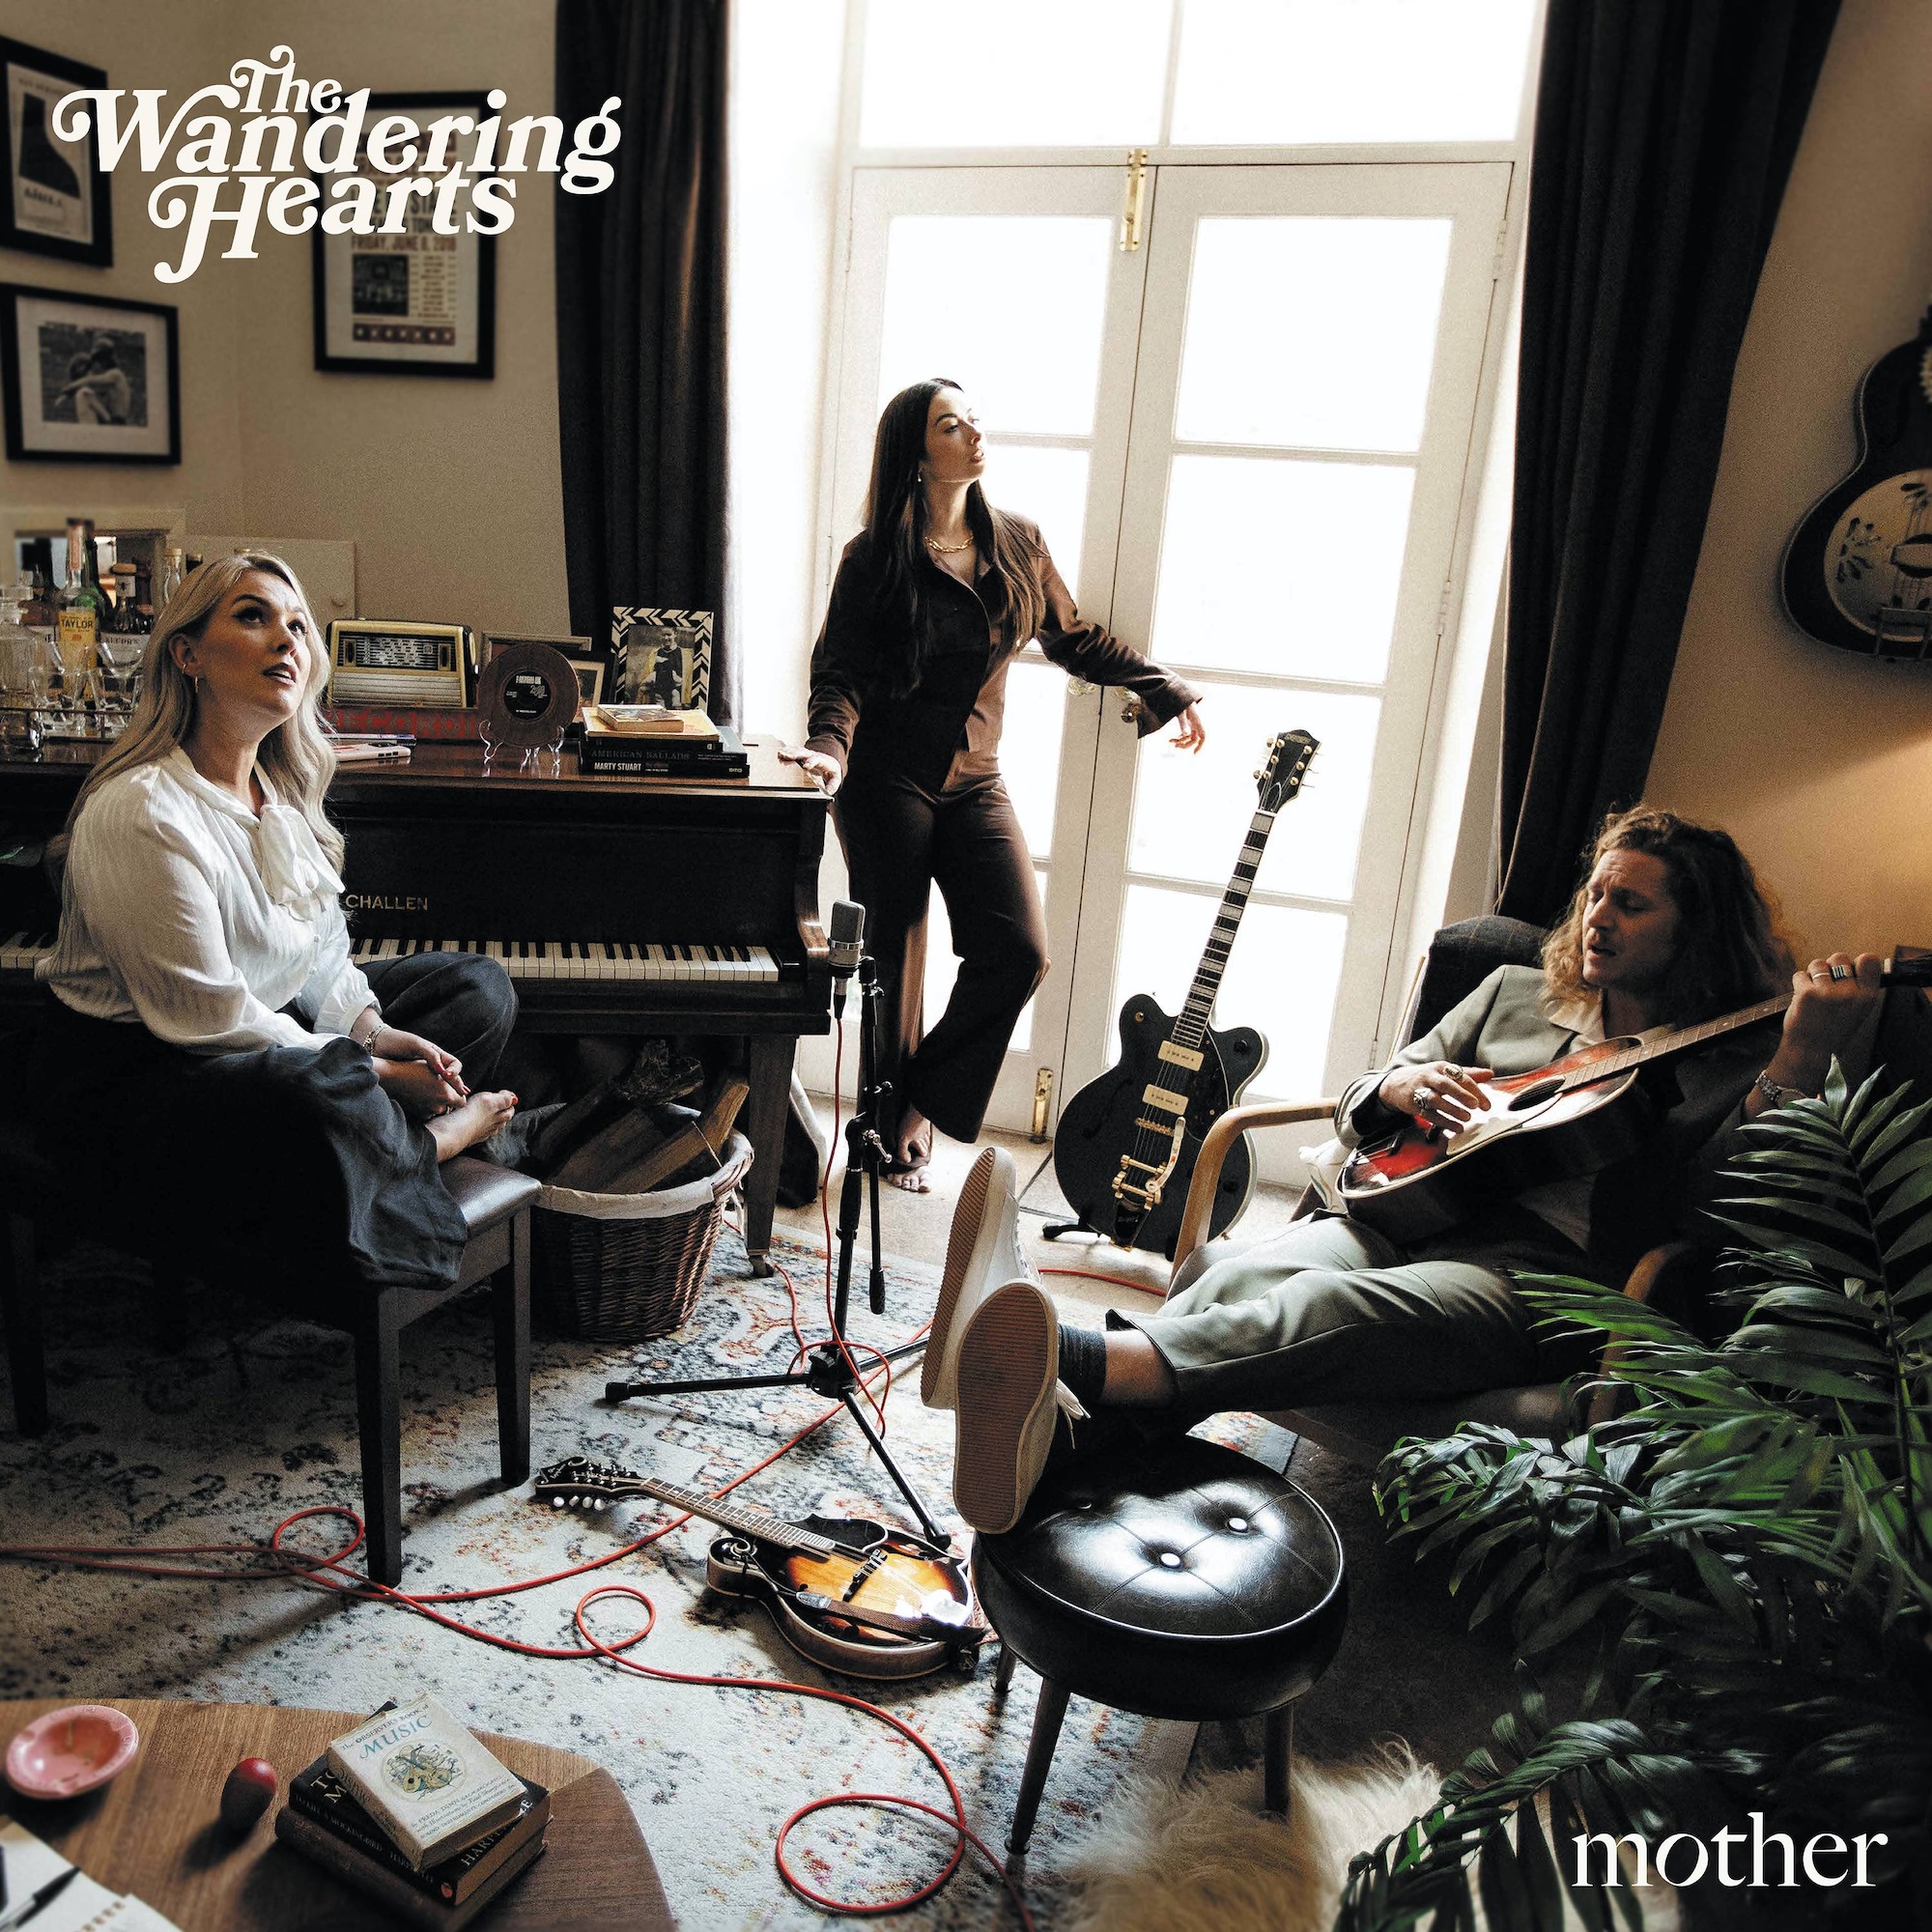 THE WANDERING HEARTS ANNOUNCE NEW ALBUM MOTHER OUT MARCH 22 ON CHRYSALIS RECORDS